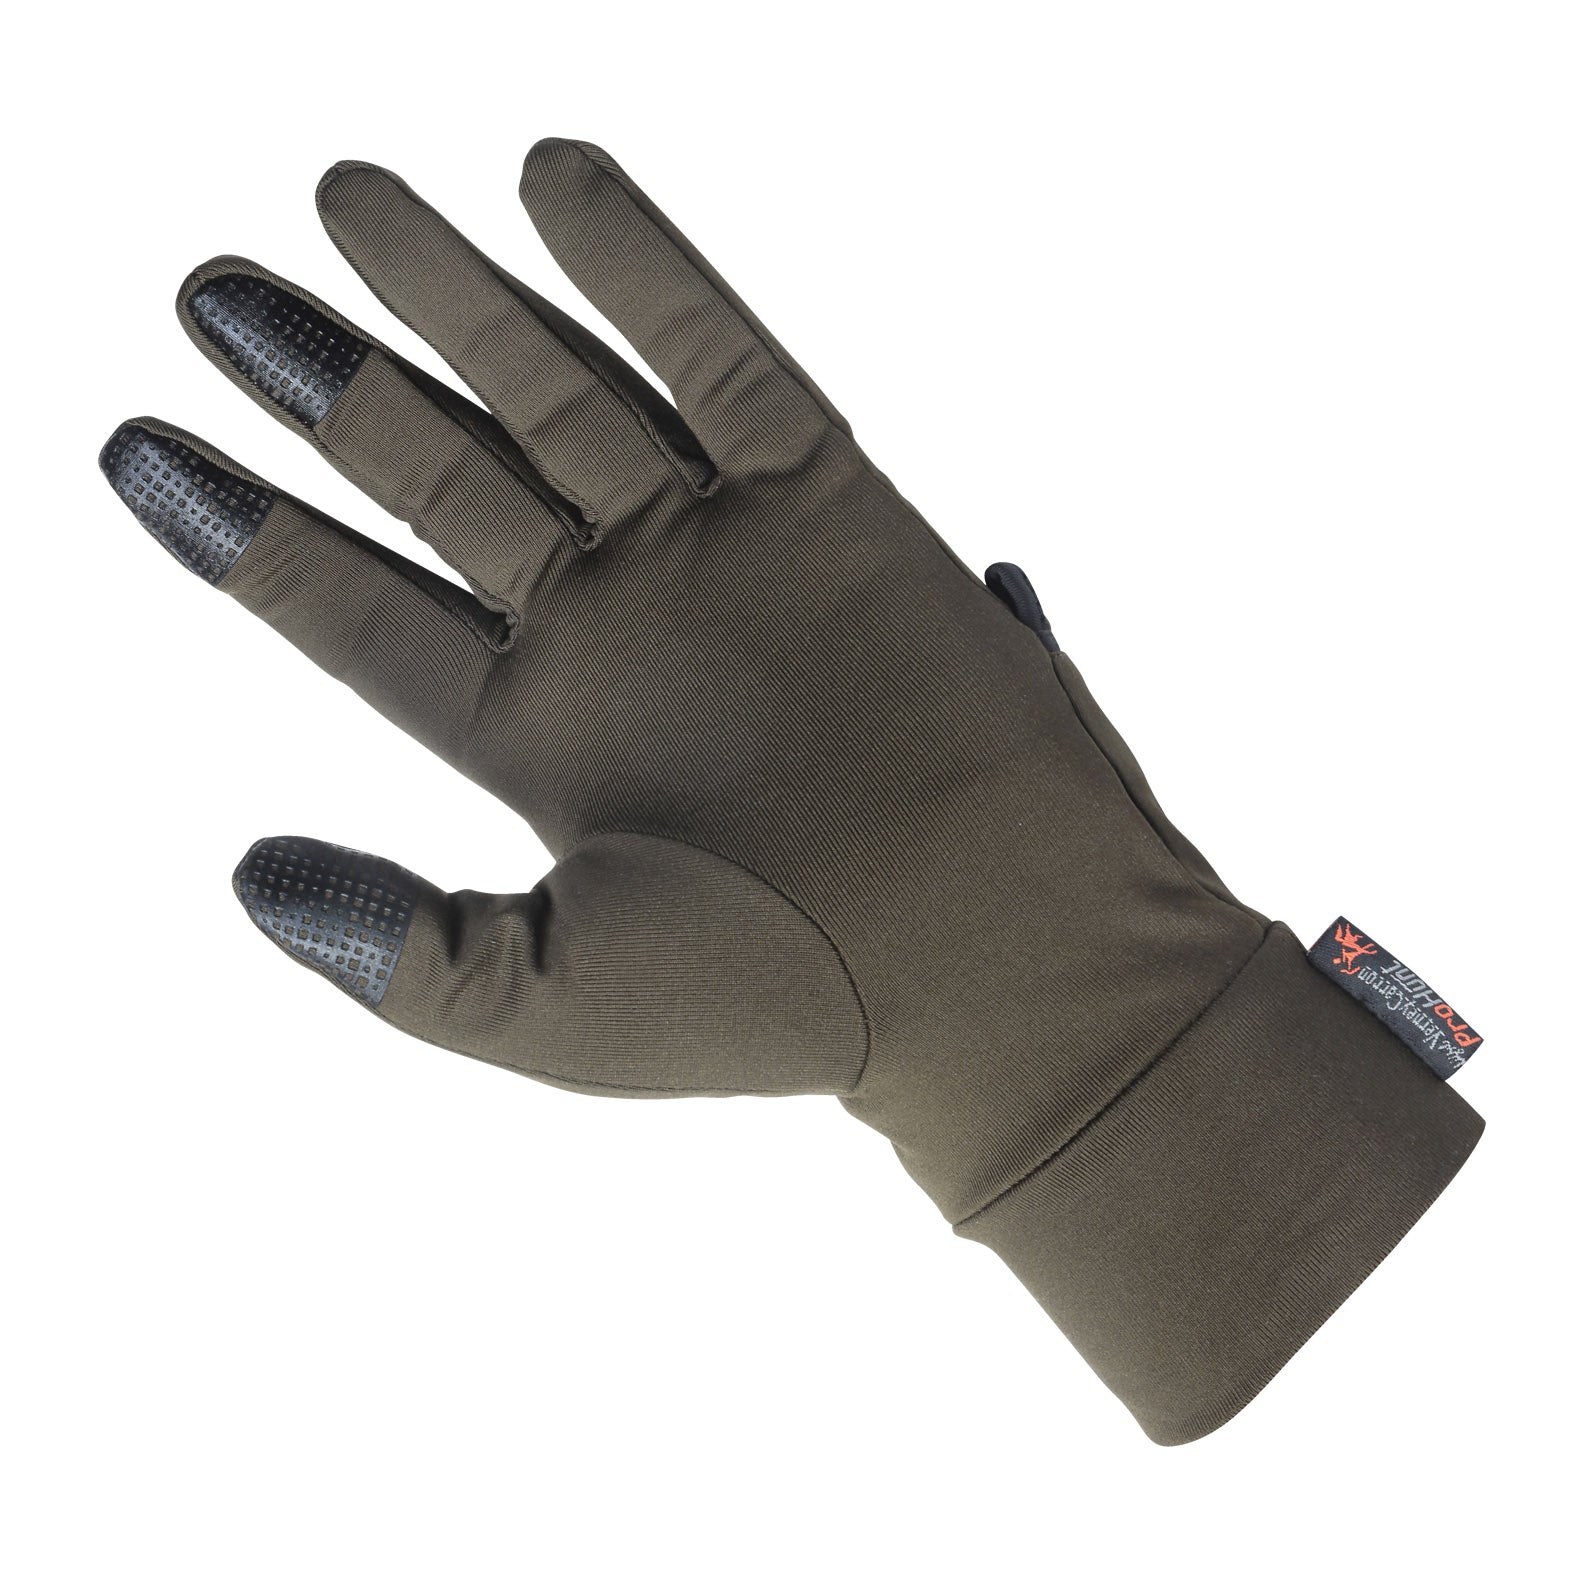 Verney-Carron-tactile-Glove/Mittens